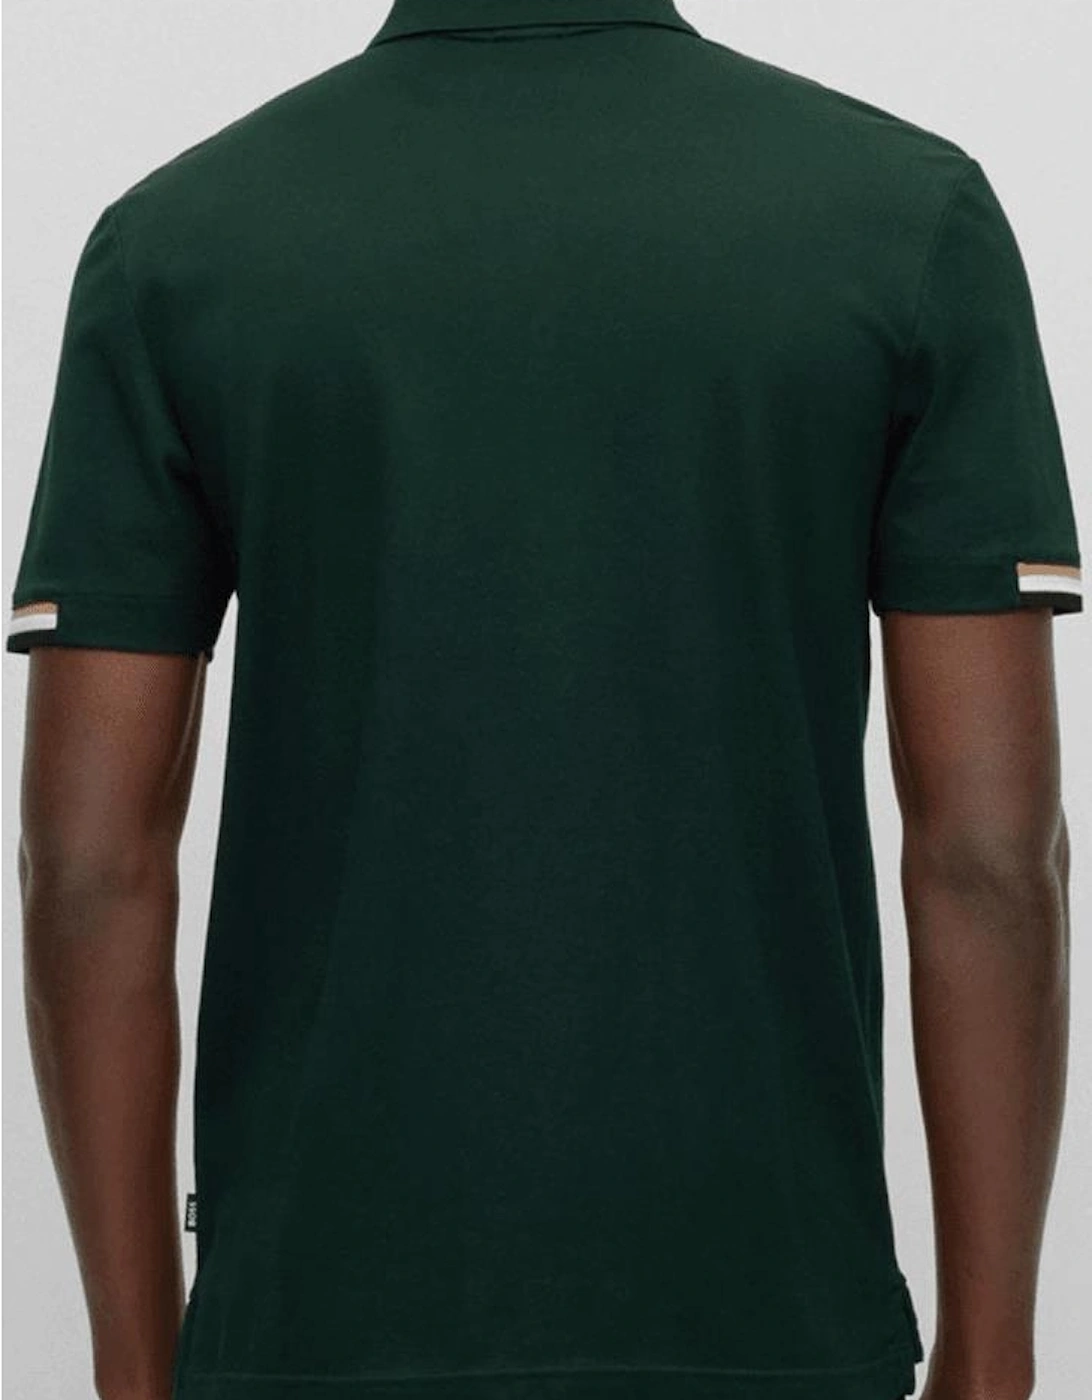 Parlay 147 Striped Sleeve Forest Green Polo Shirt